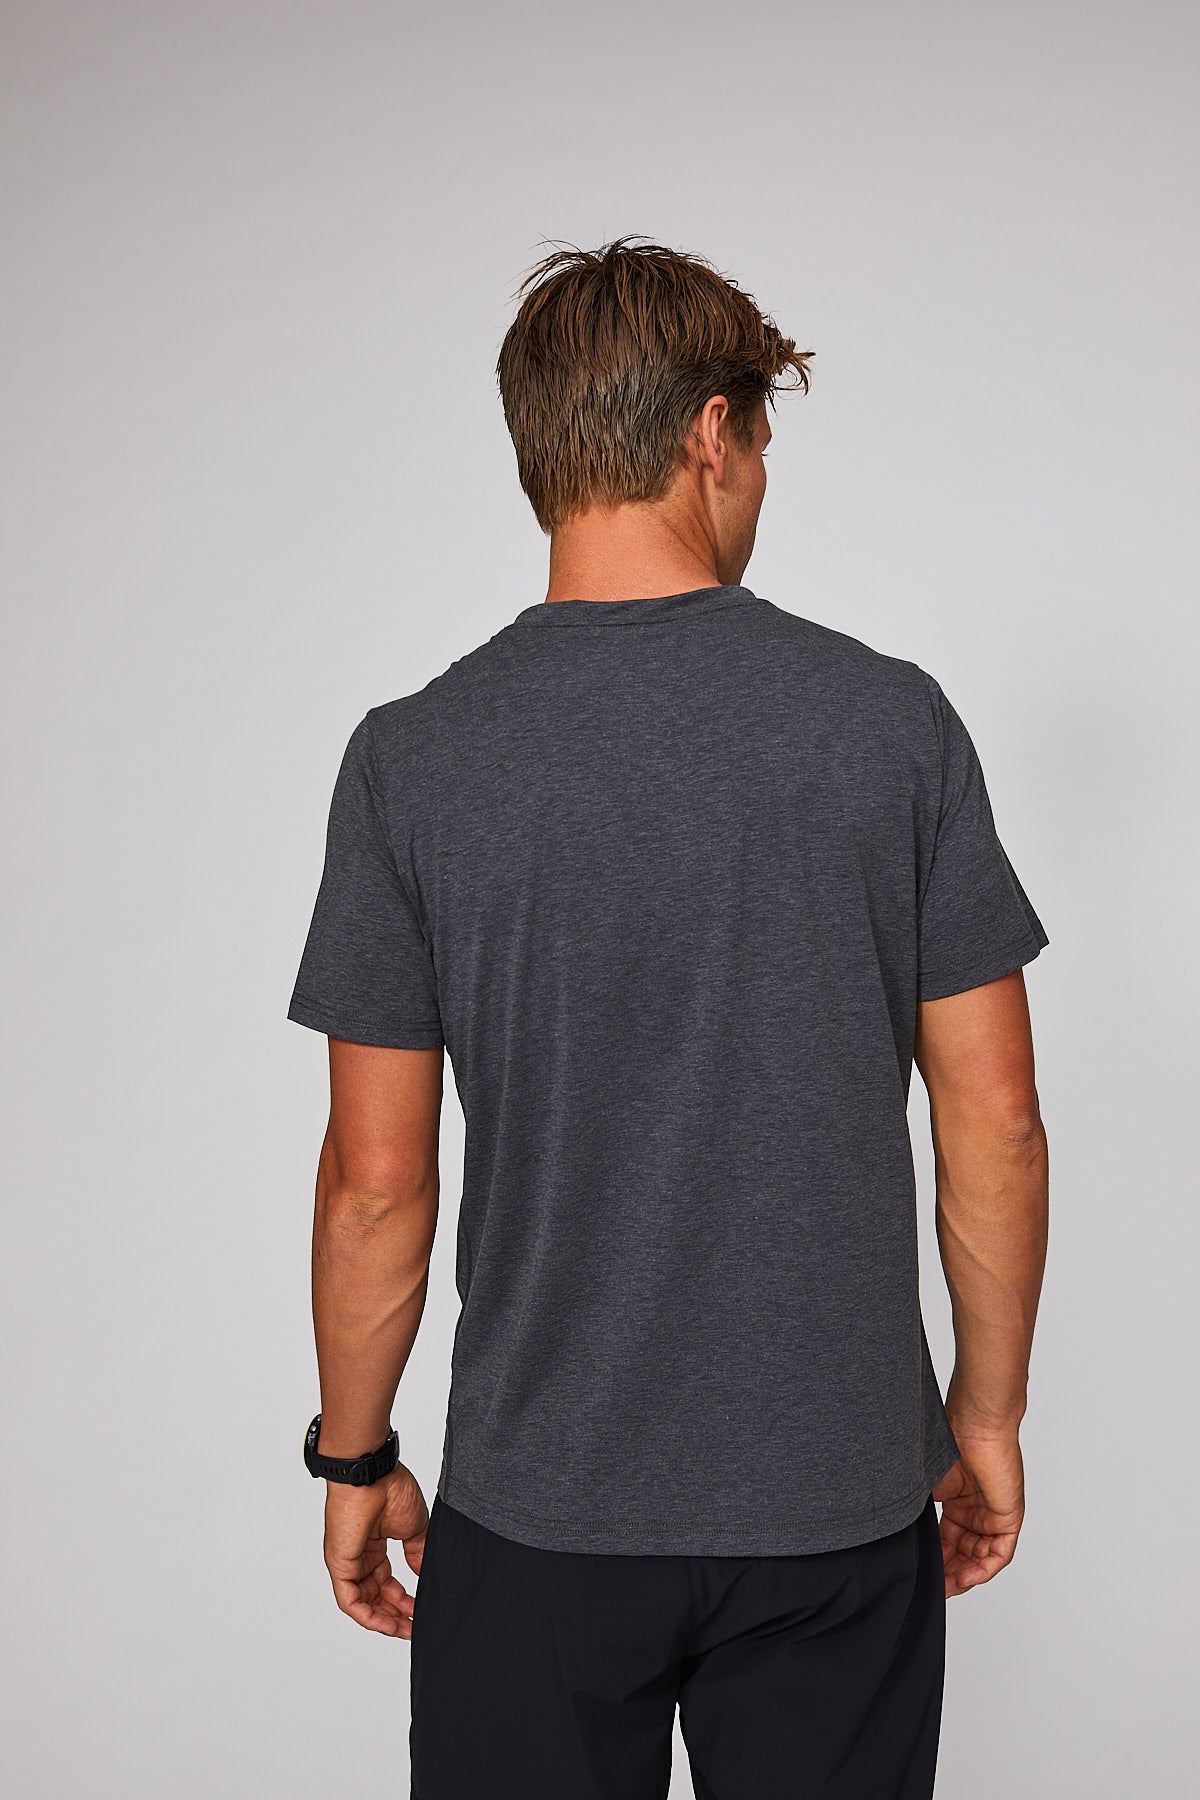 Active Tee for Men with Drirelease Technology